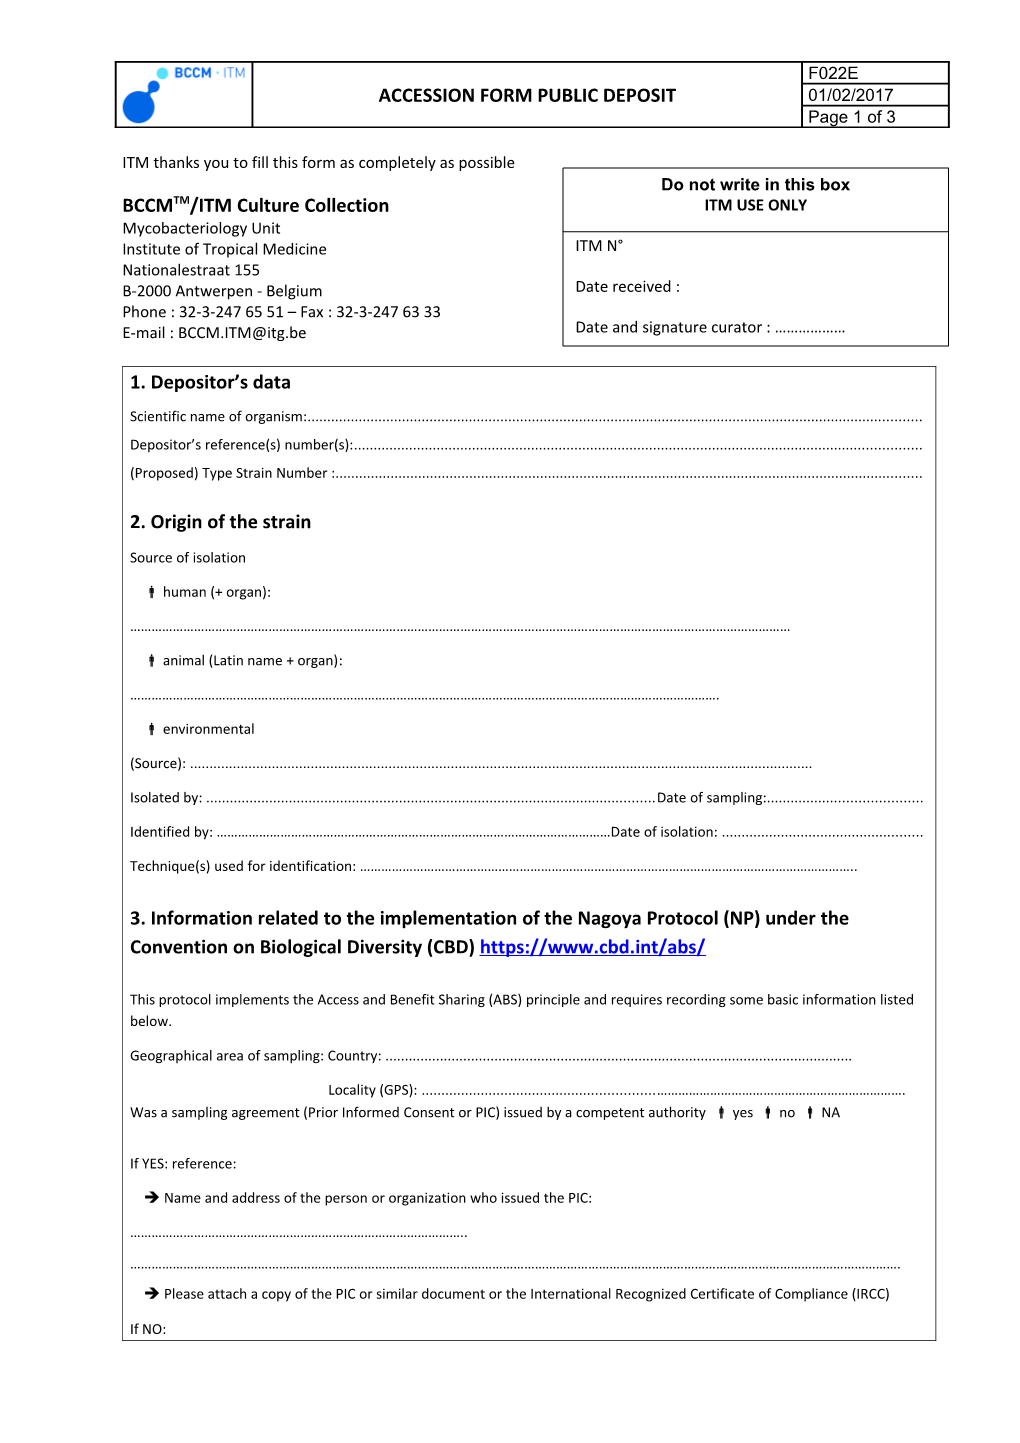 IHEM Thanks You to Fill This Form As Completely As Possible